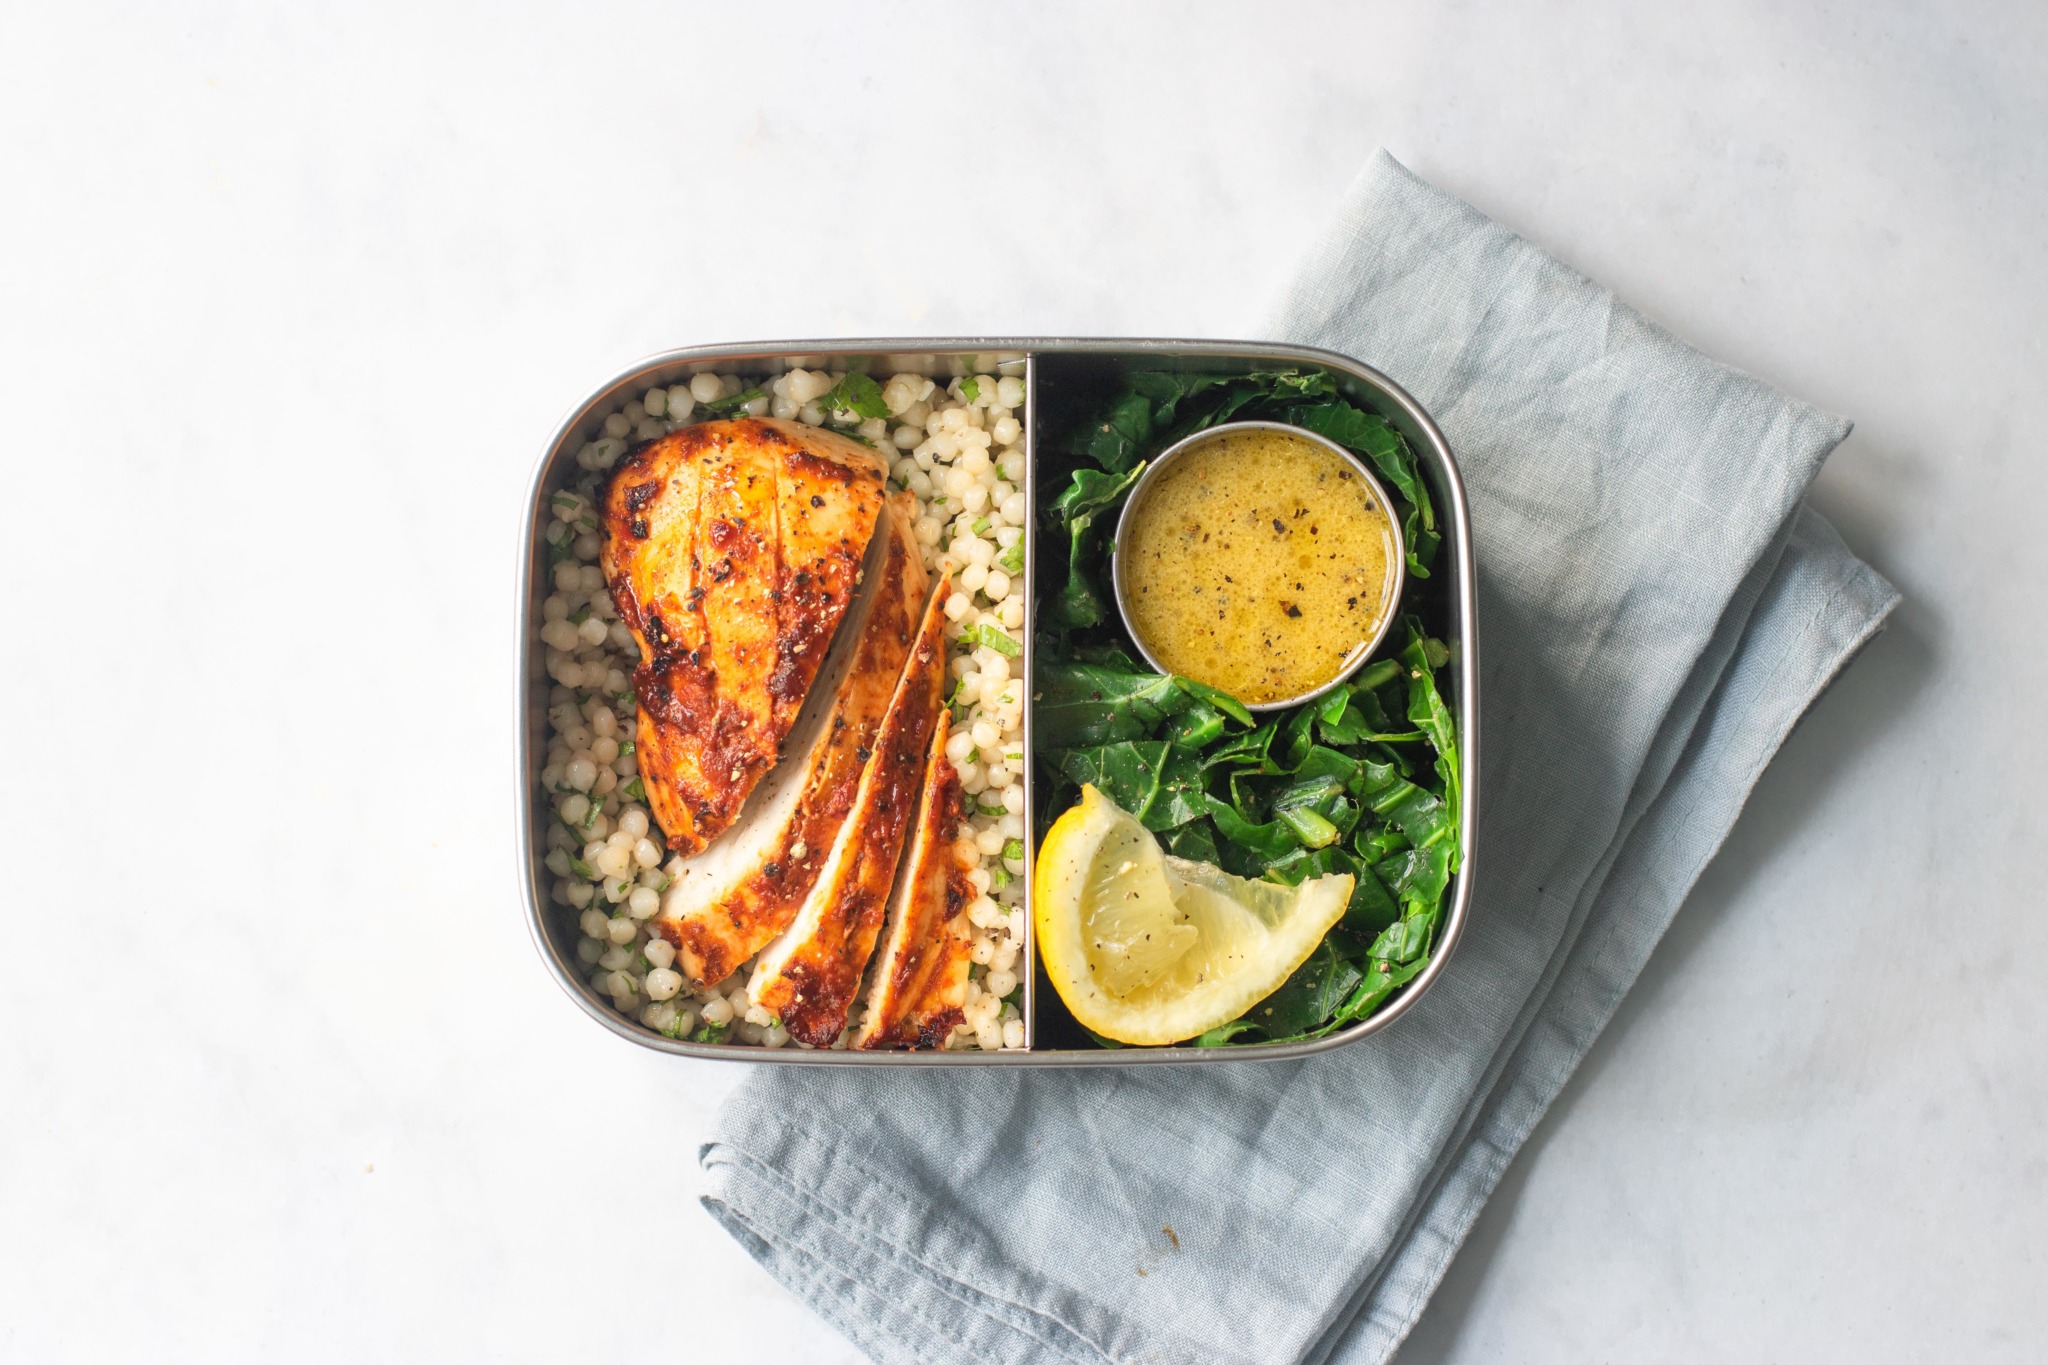 Moron Harissa Chicken With Wholewheat Couscous And Seasonal Greens